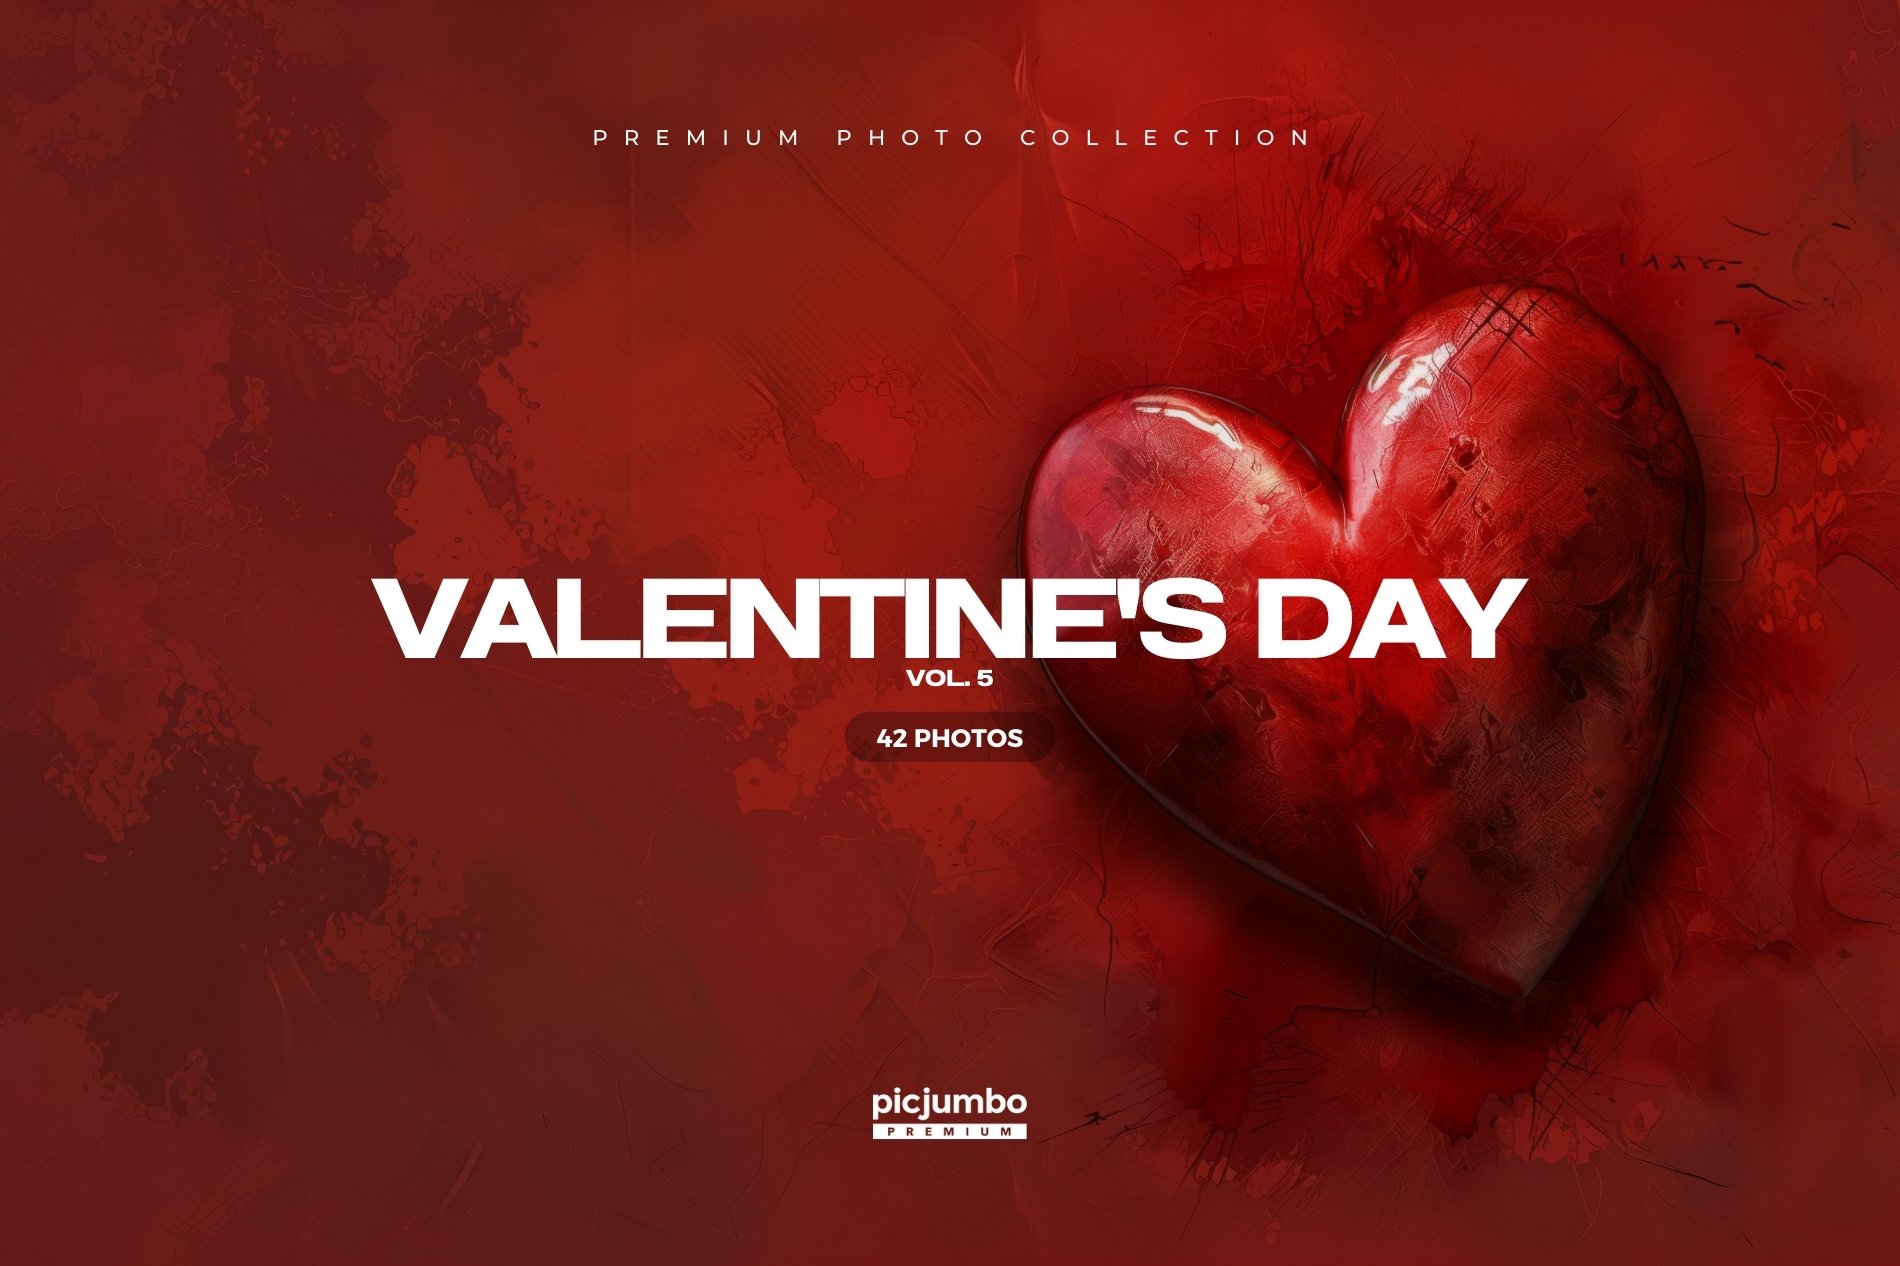 Download hi-res stock photos from our Valentine’s Day Vol. 5 PREMIUM Collection!